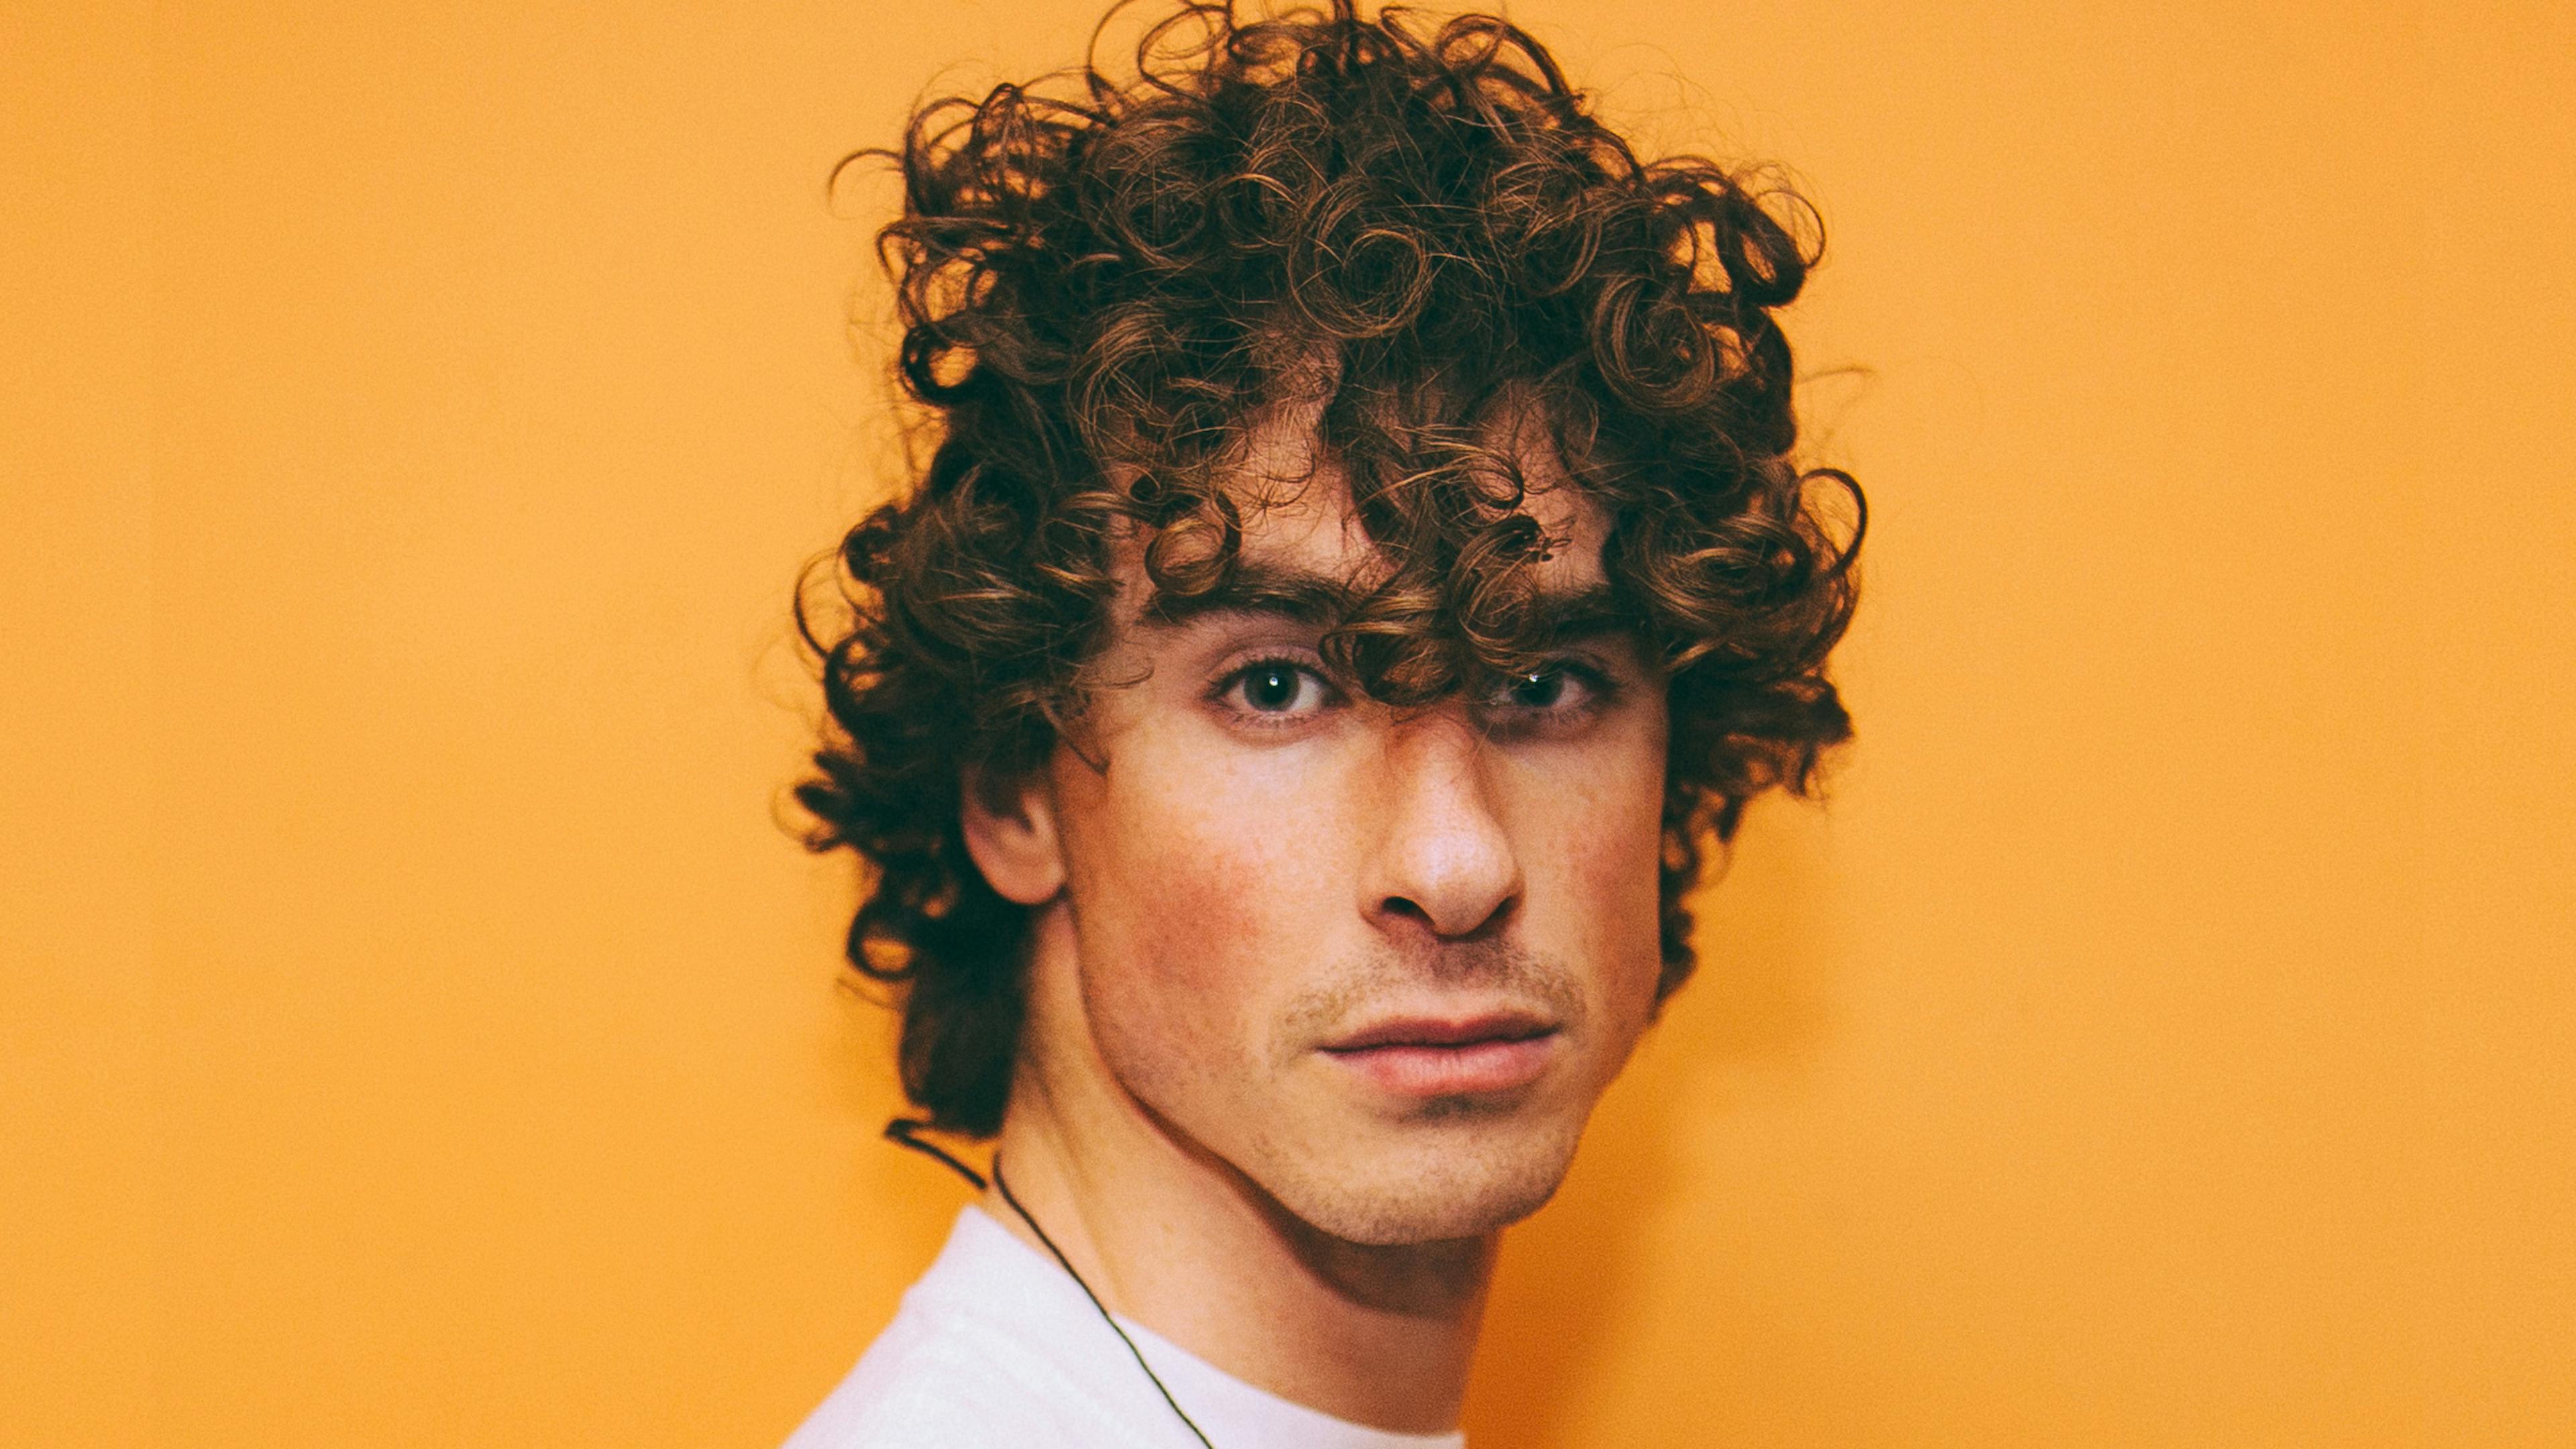 Rob Damiani: "Live Music Isn't About A Crappy Photo That You Can Put Up On Your Social Media"